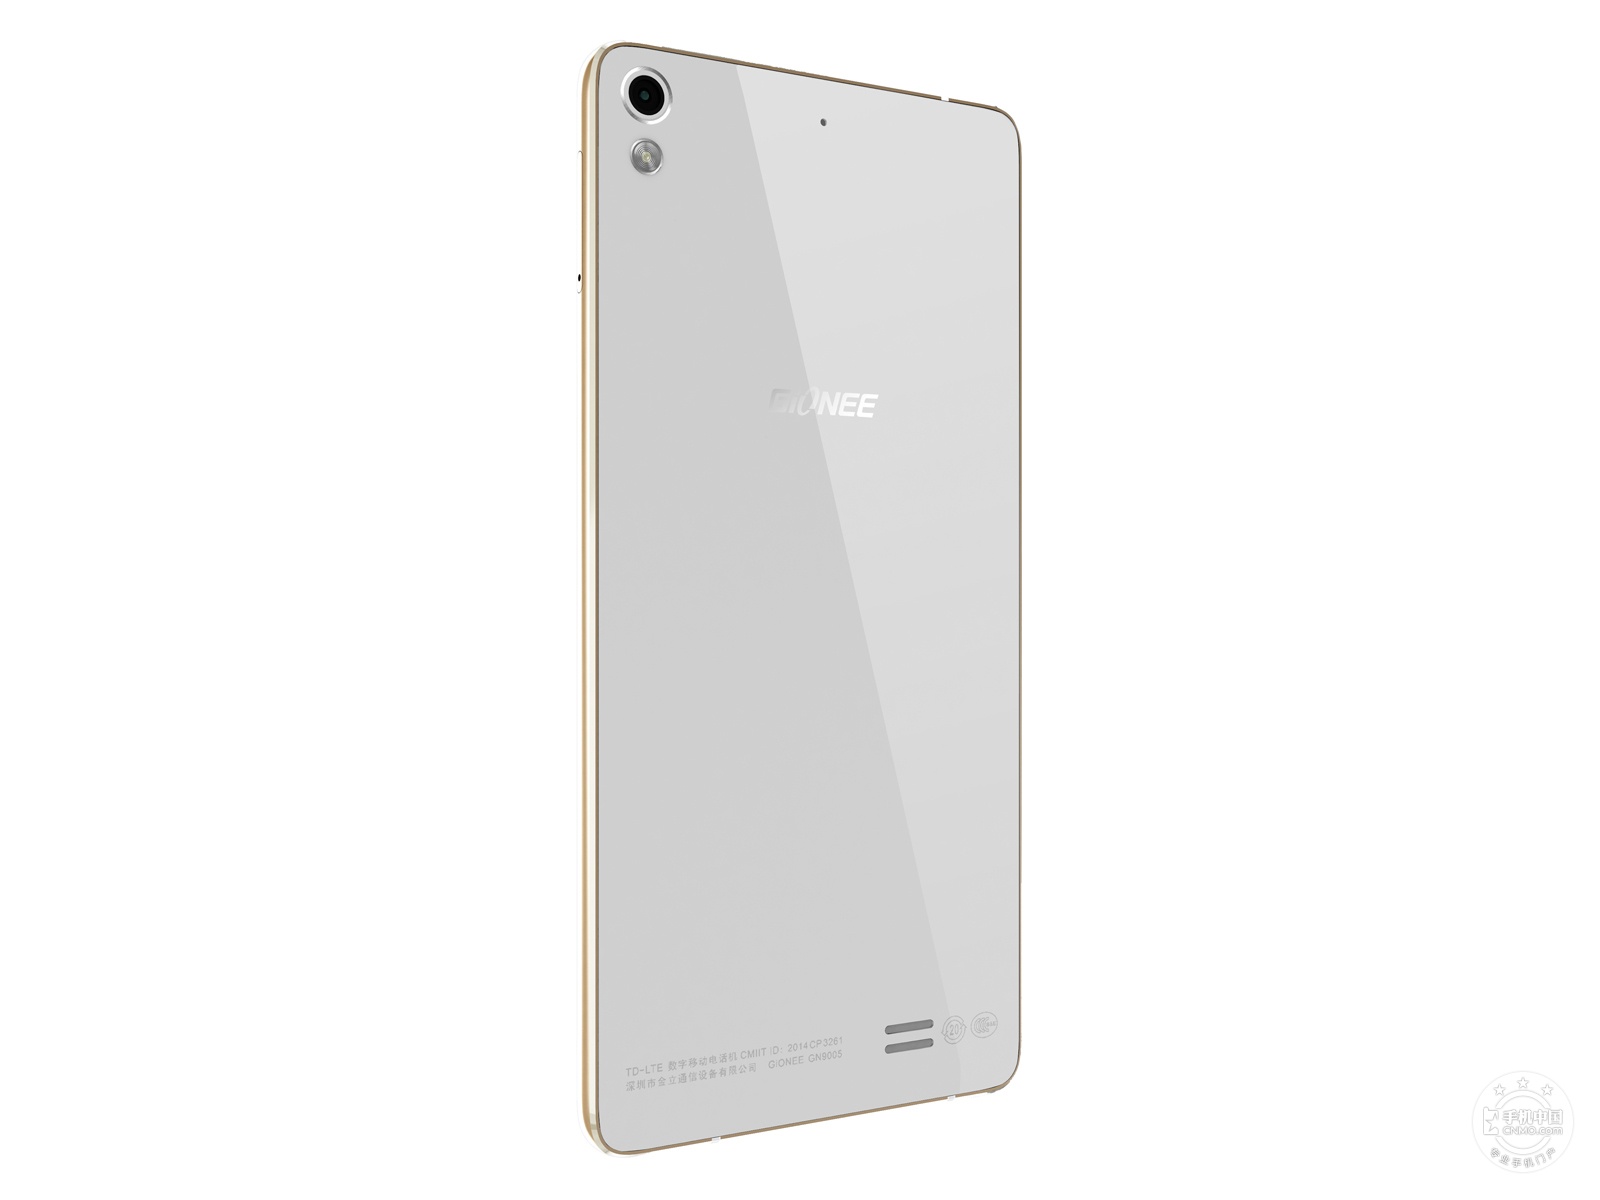 Gionee-Elife-S5.1-23